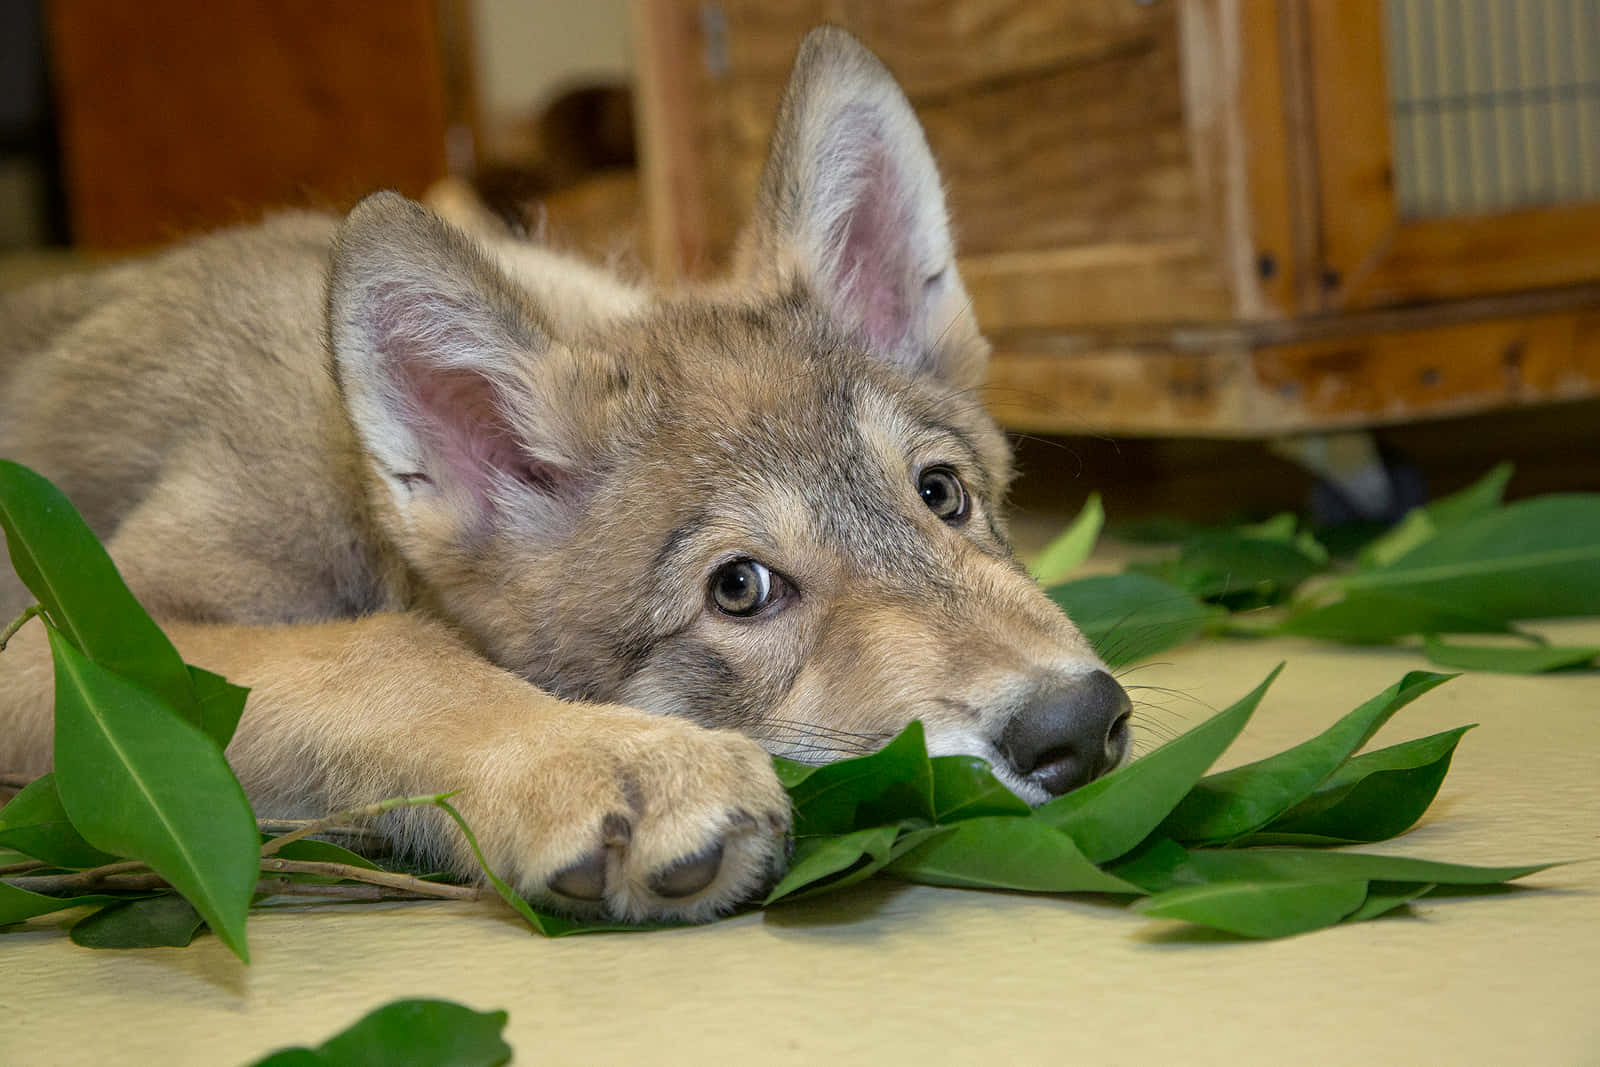 Adorable Wolf Pup Exploring The Wild Background